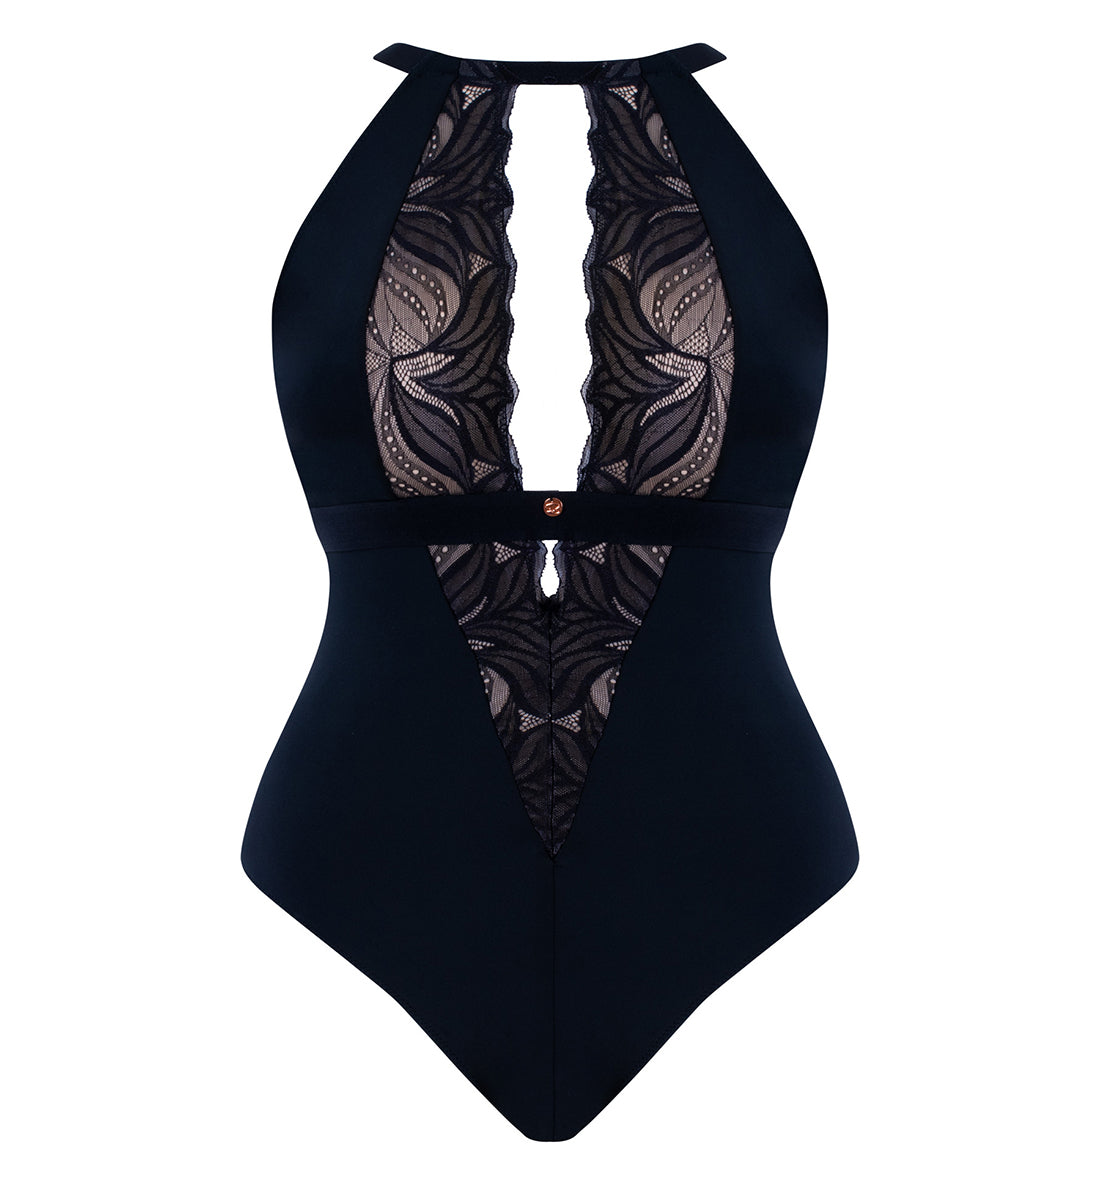 Scantilly by Curvy Kate Indulgence Stretch Lace Body Suit (ST010704),S,Blk/Latte - Black/Latte,Small